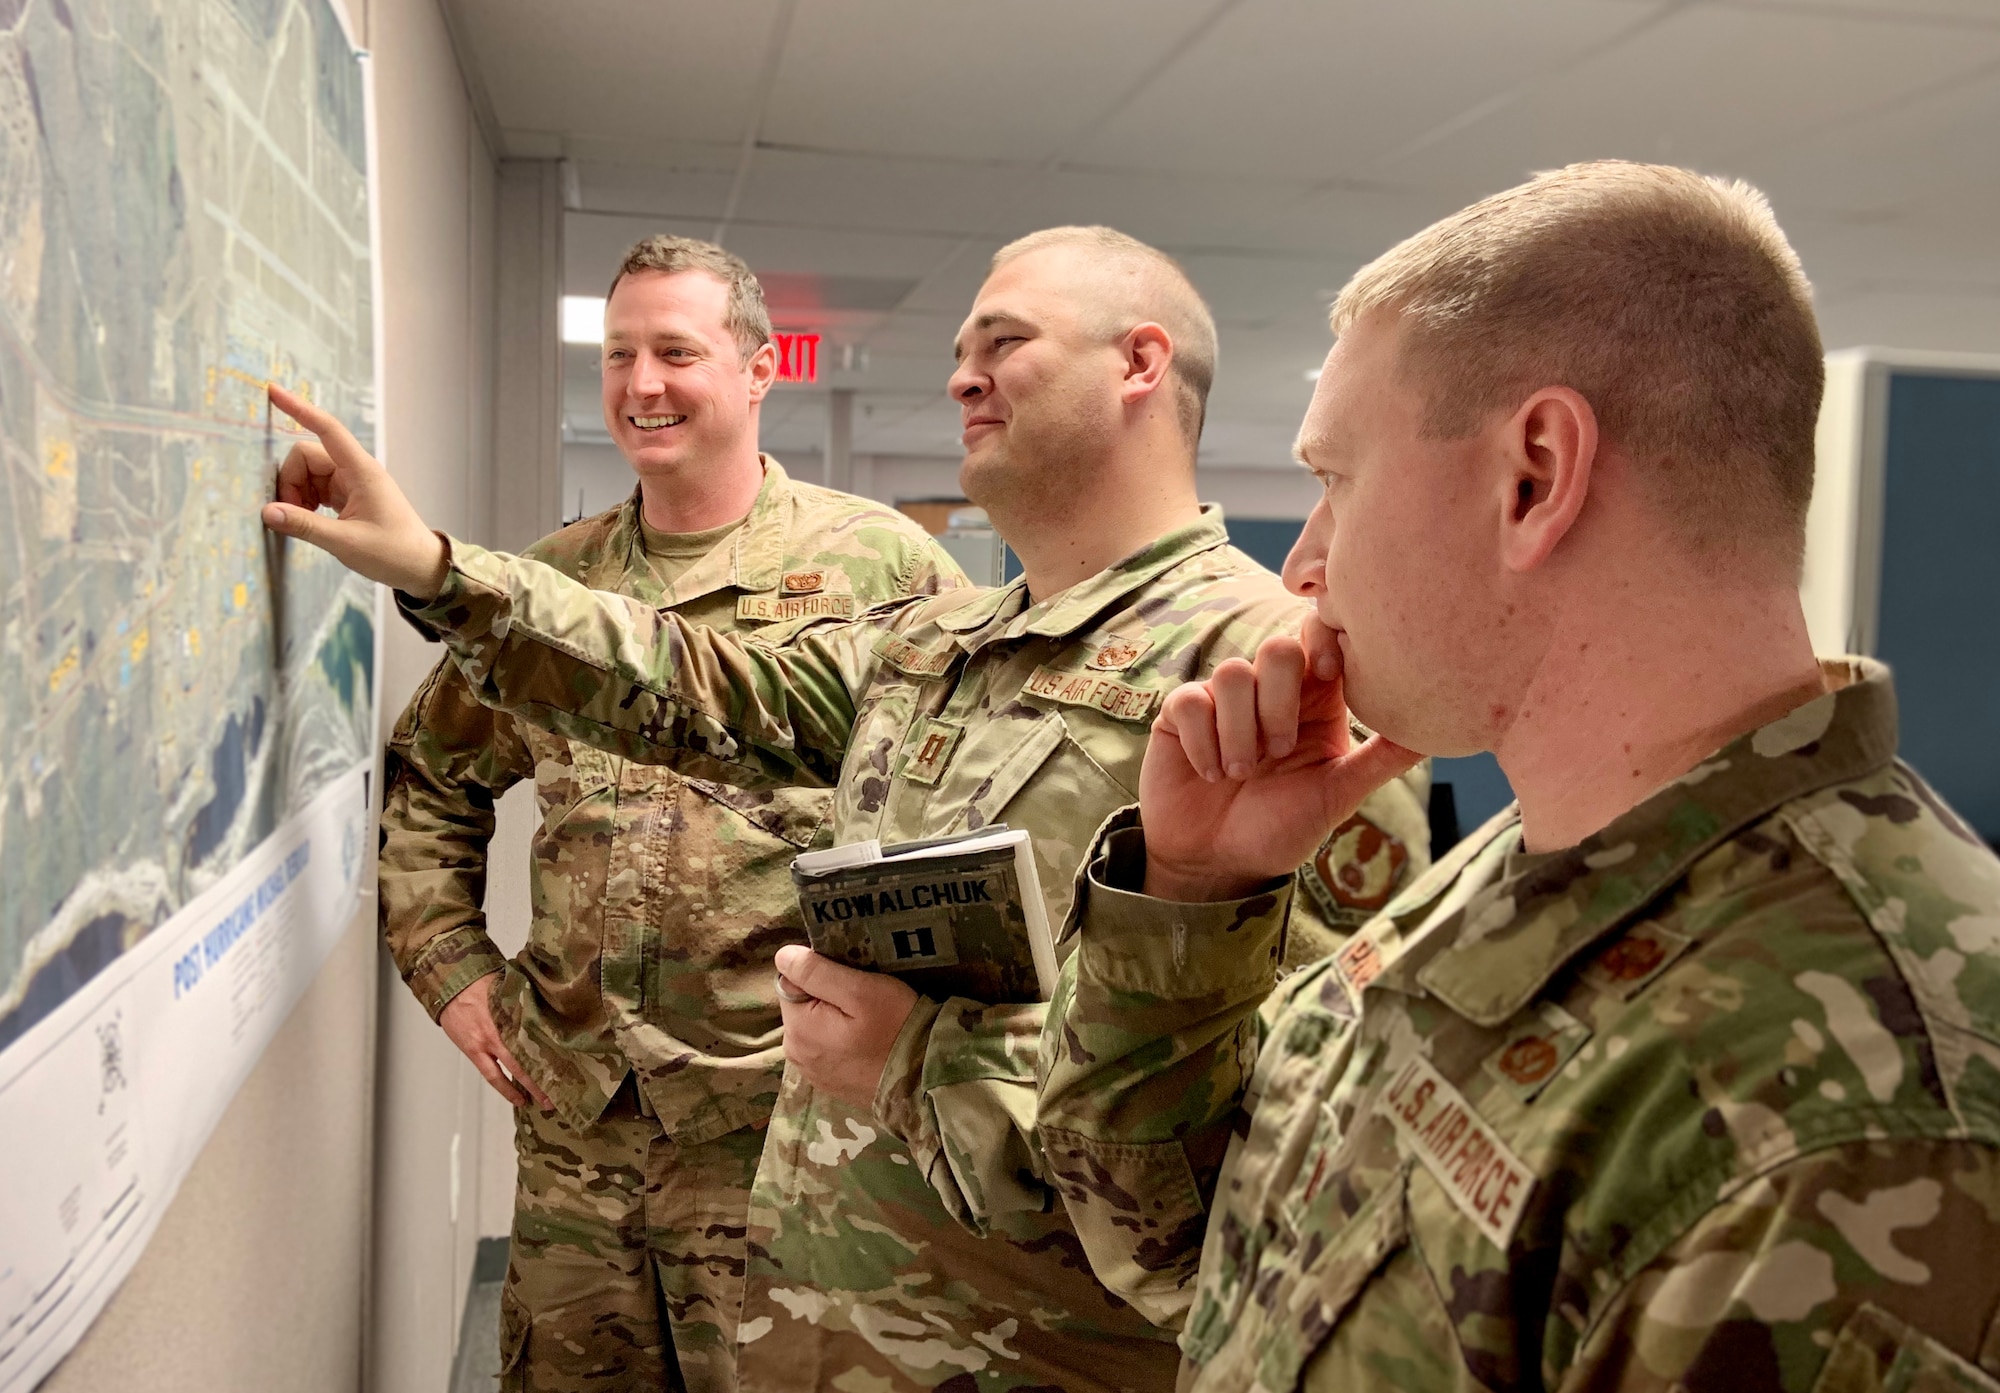 From left, Capts. Zach Bierhaus, Kyle Kowalchuk and Will Page discuss rebuild plans for both the flightline and support districts on Tyndall AFB, Fla.